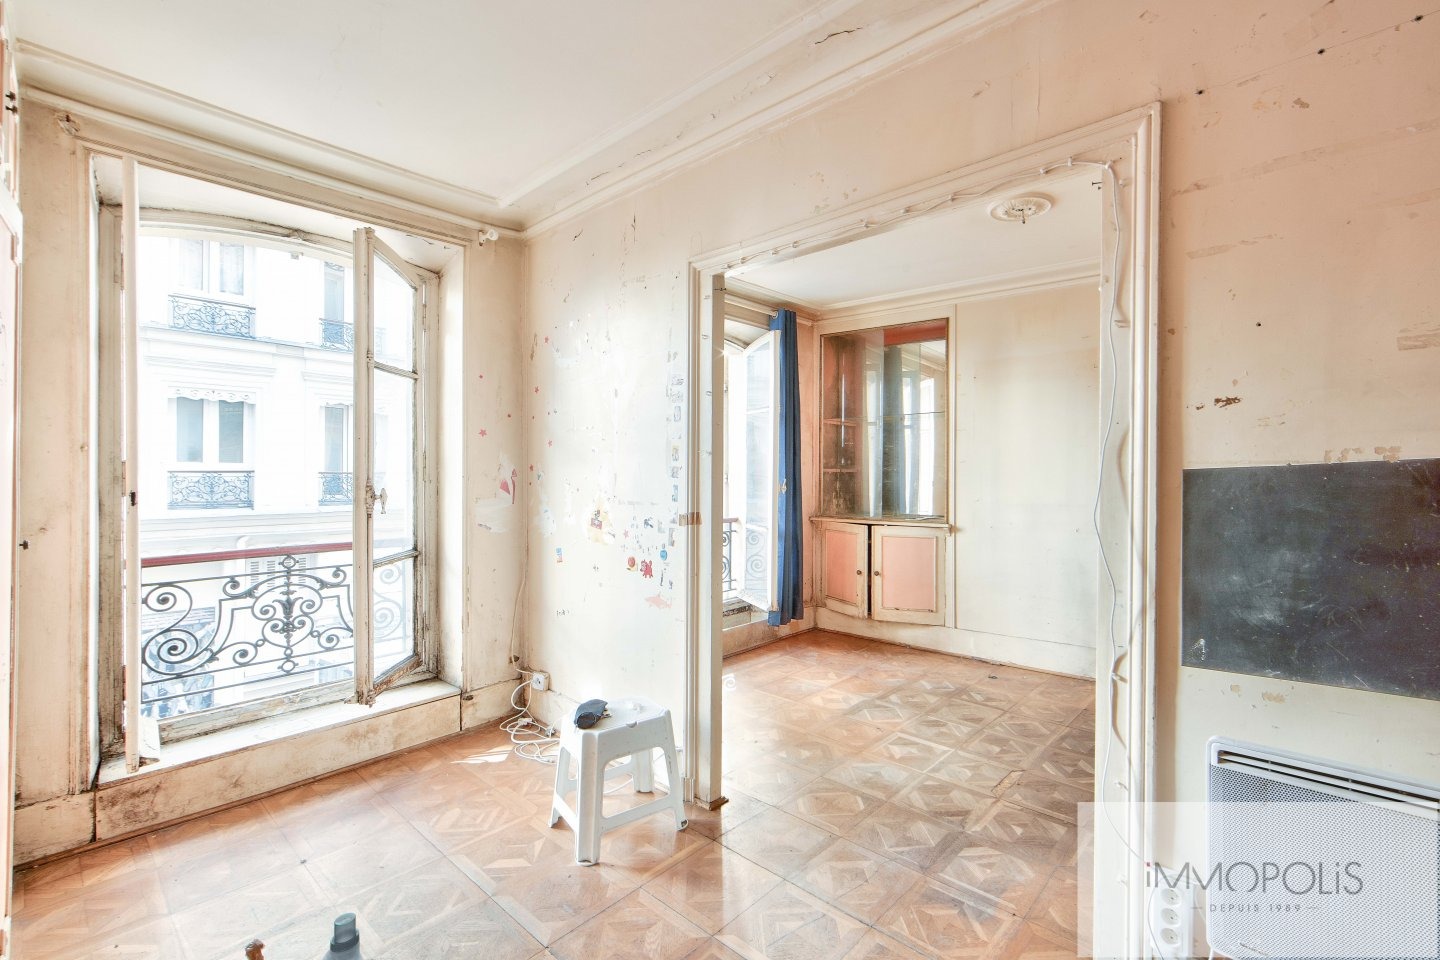 Apartment to be renovated in the heart of the abbesses. 4